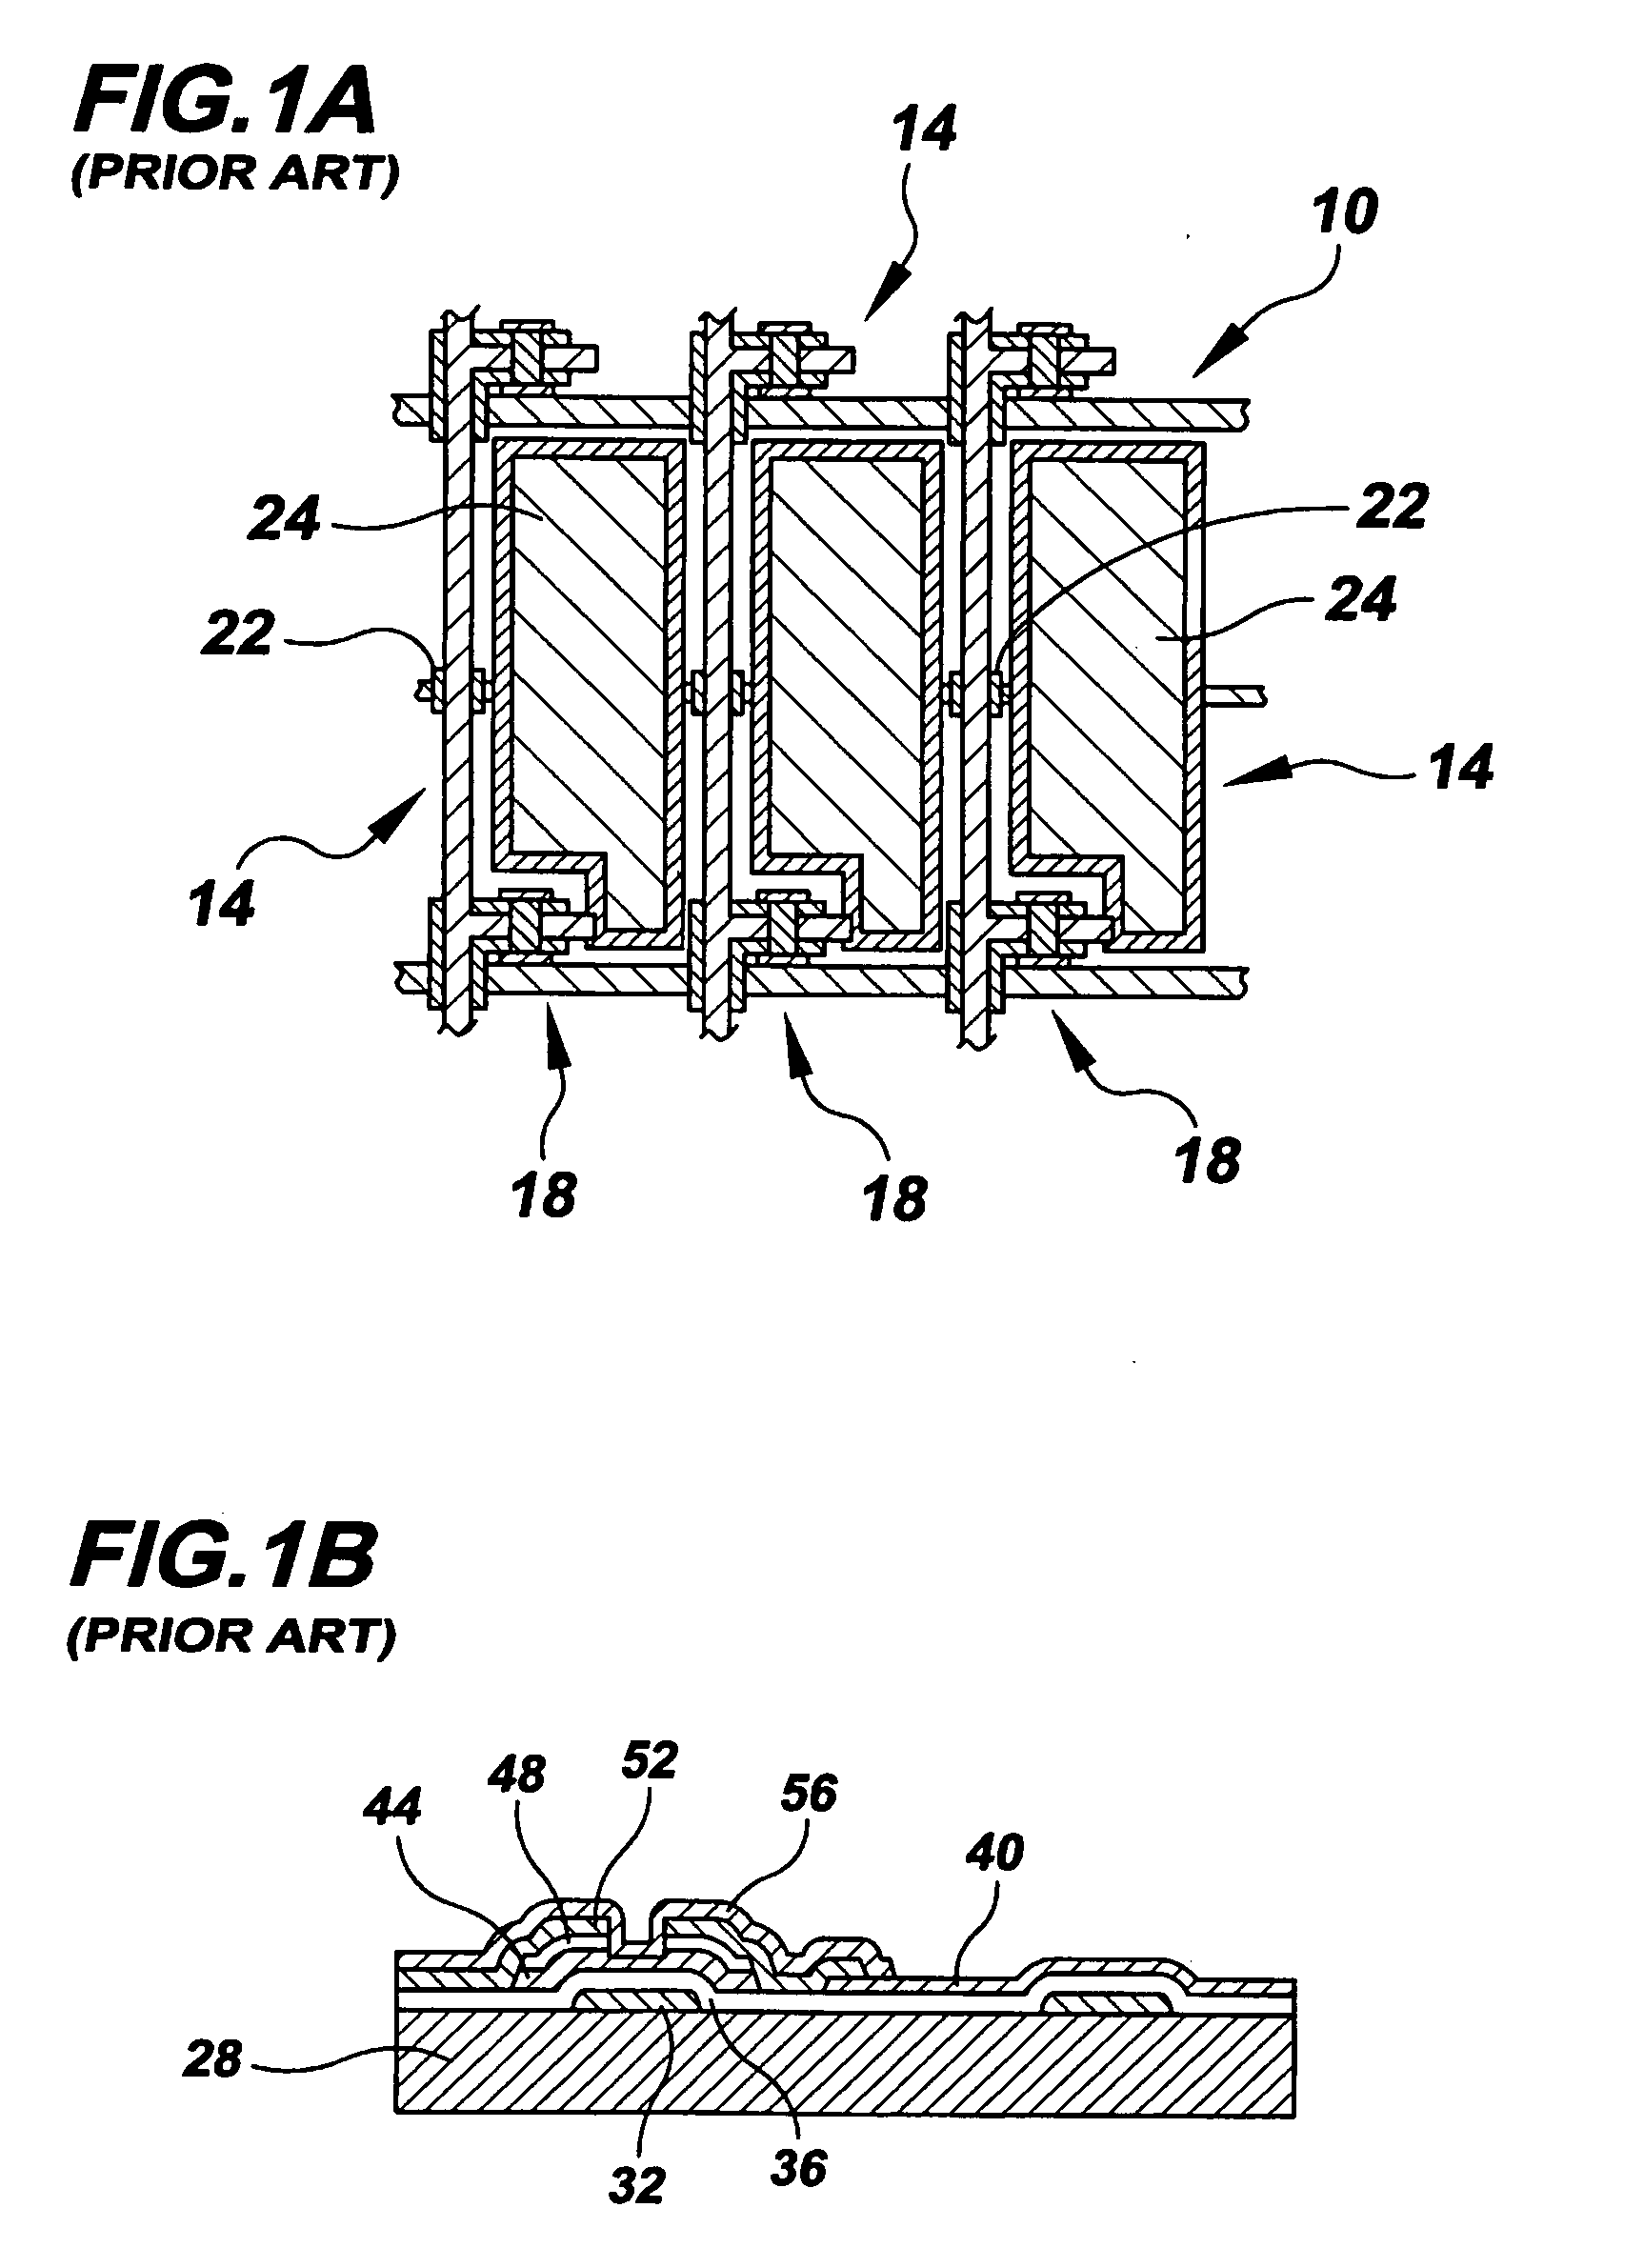 Method of making a microelectronic and/or optoelectronic circuitry sheet